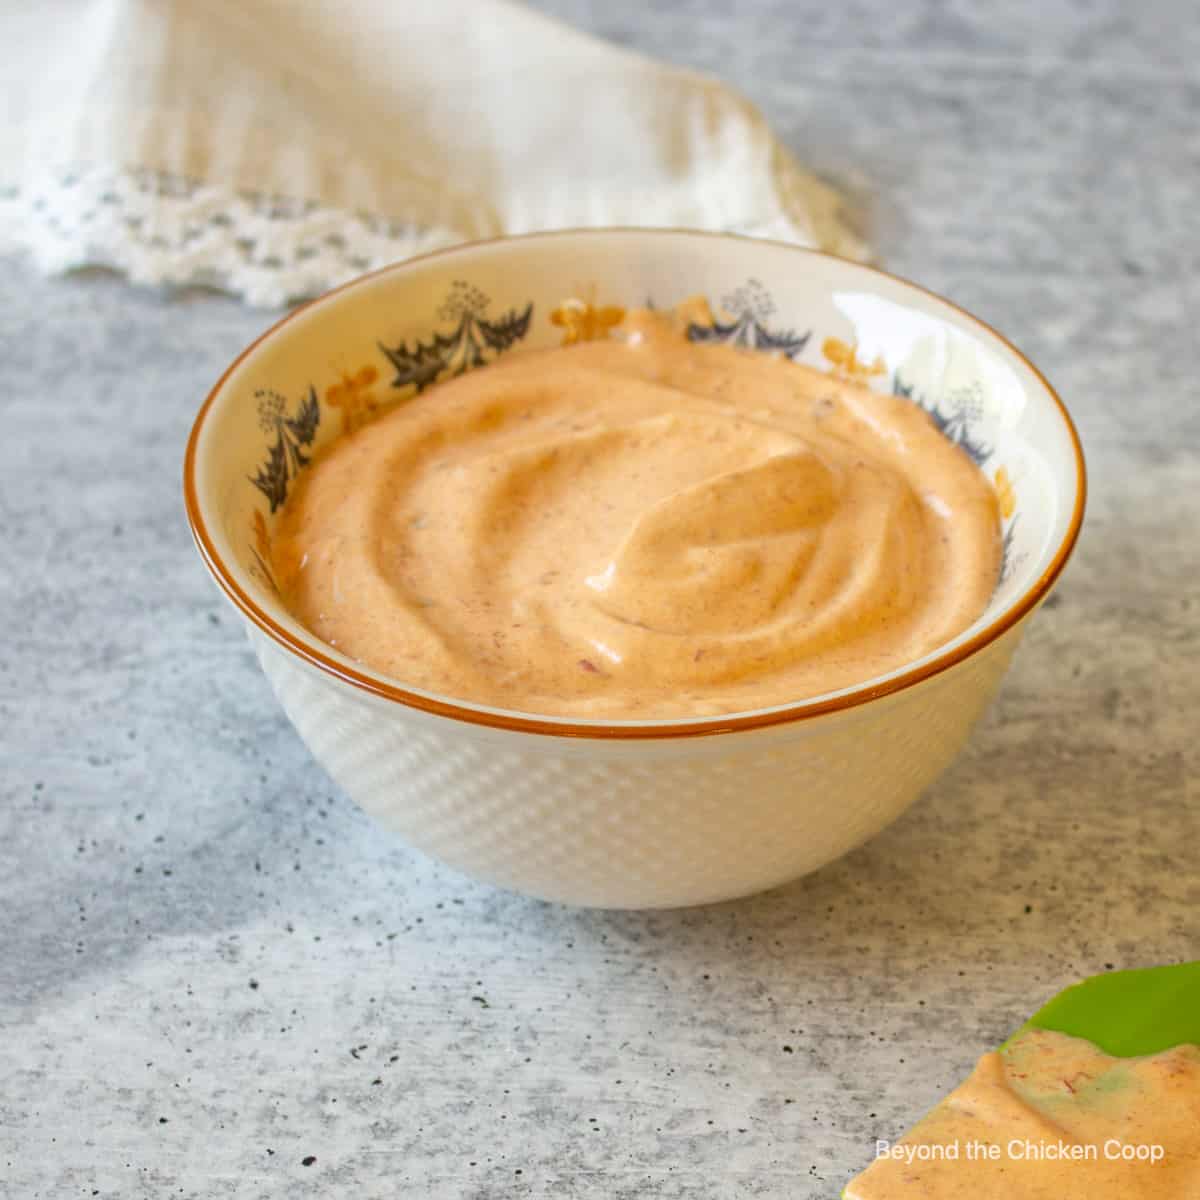 A small bowl filled with chipotle mayo.